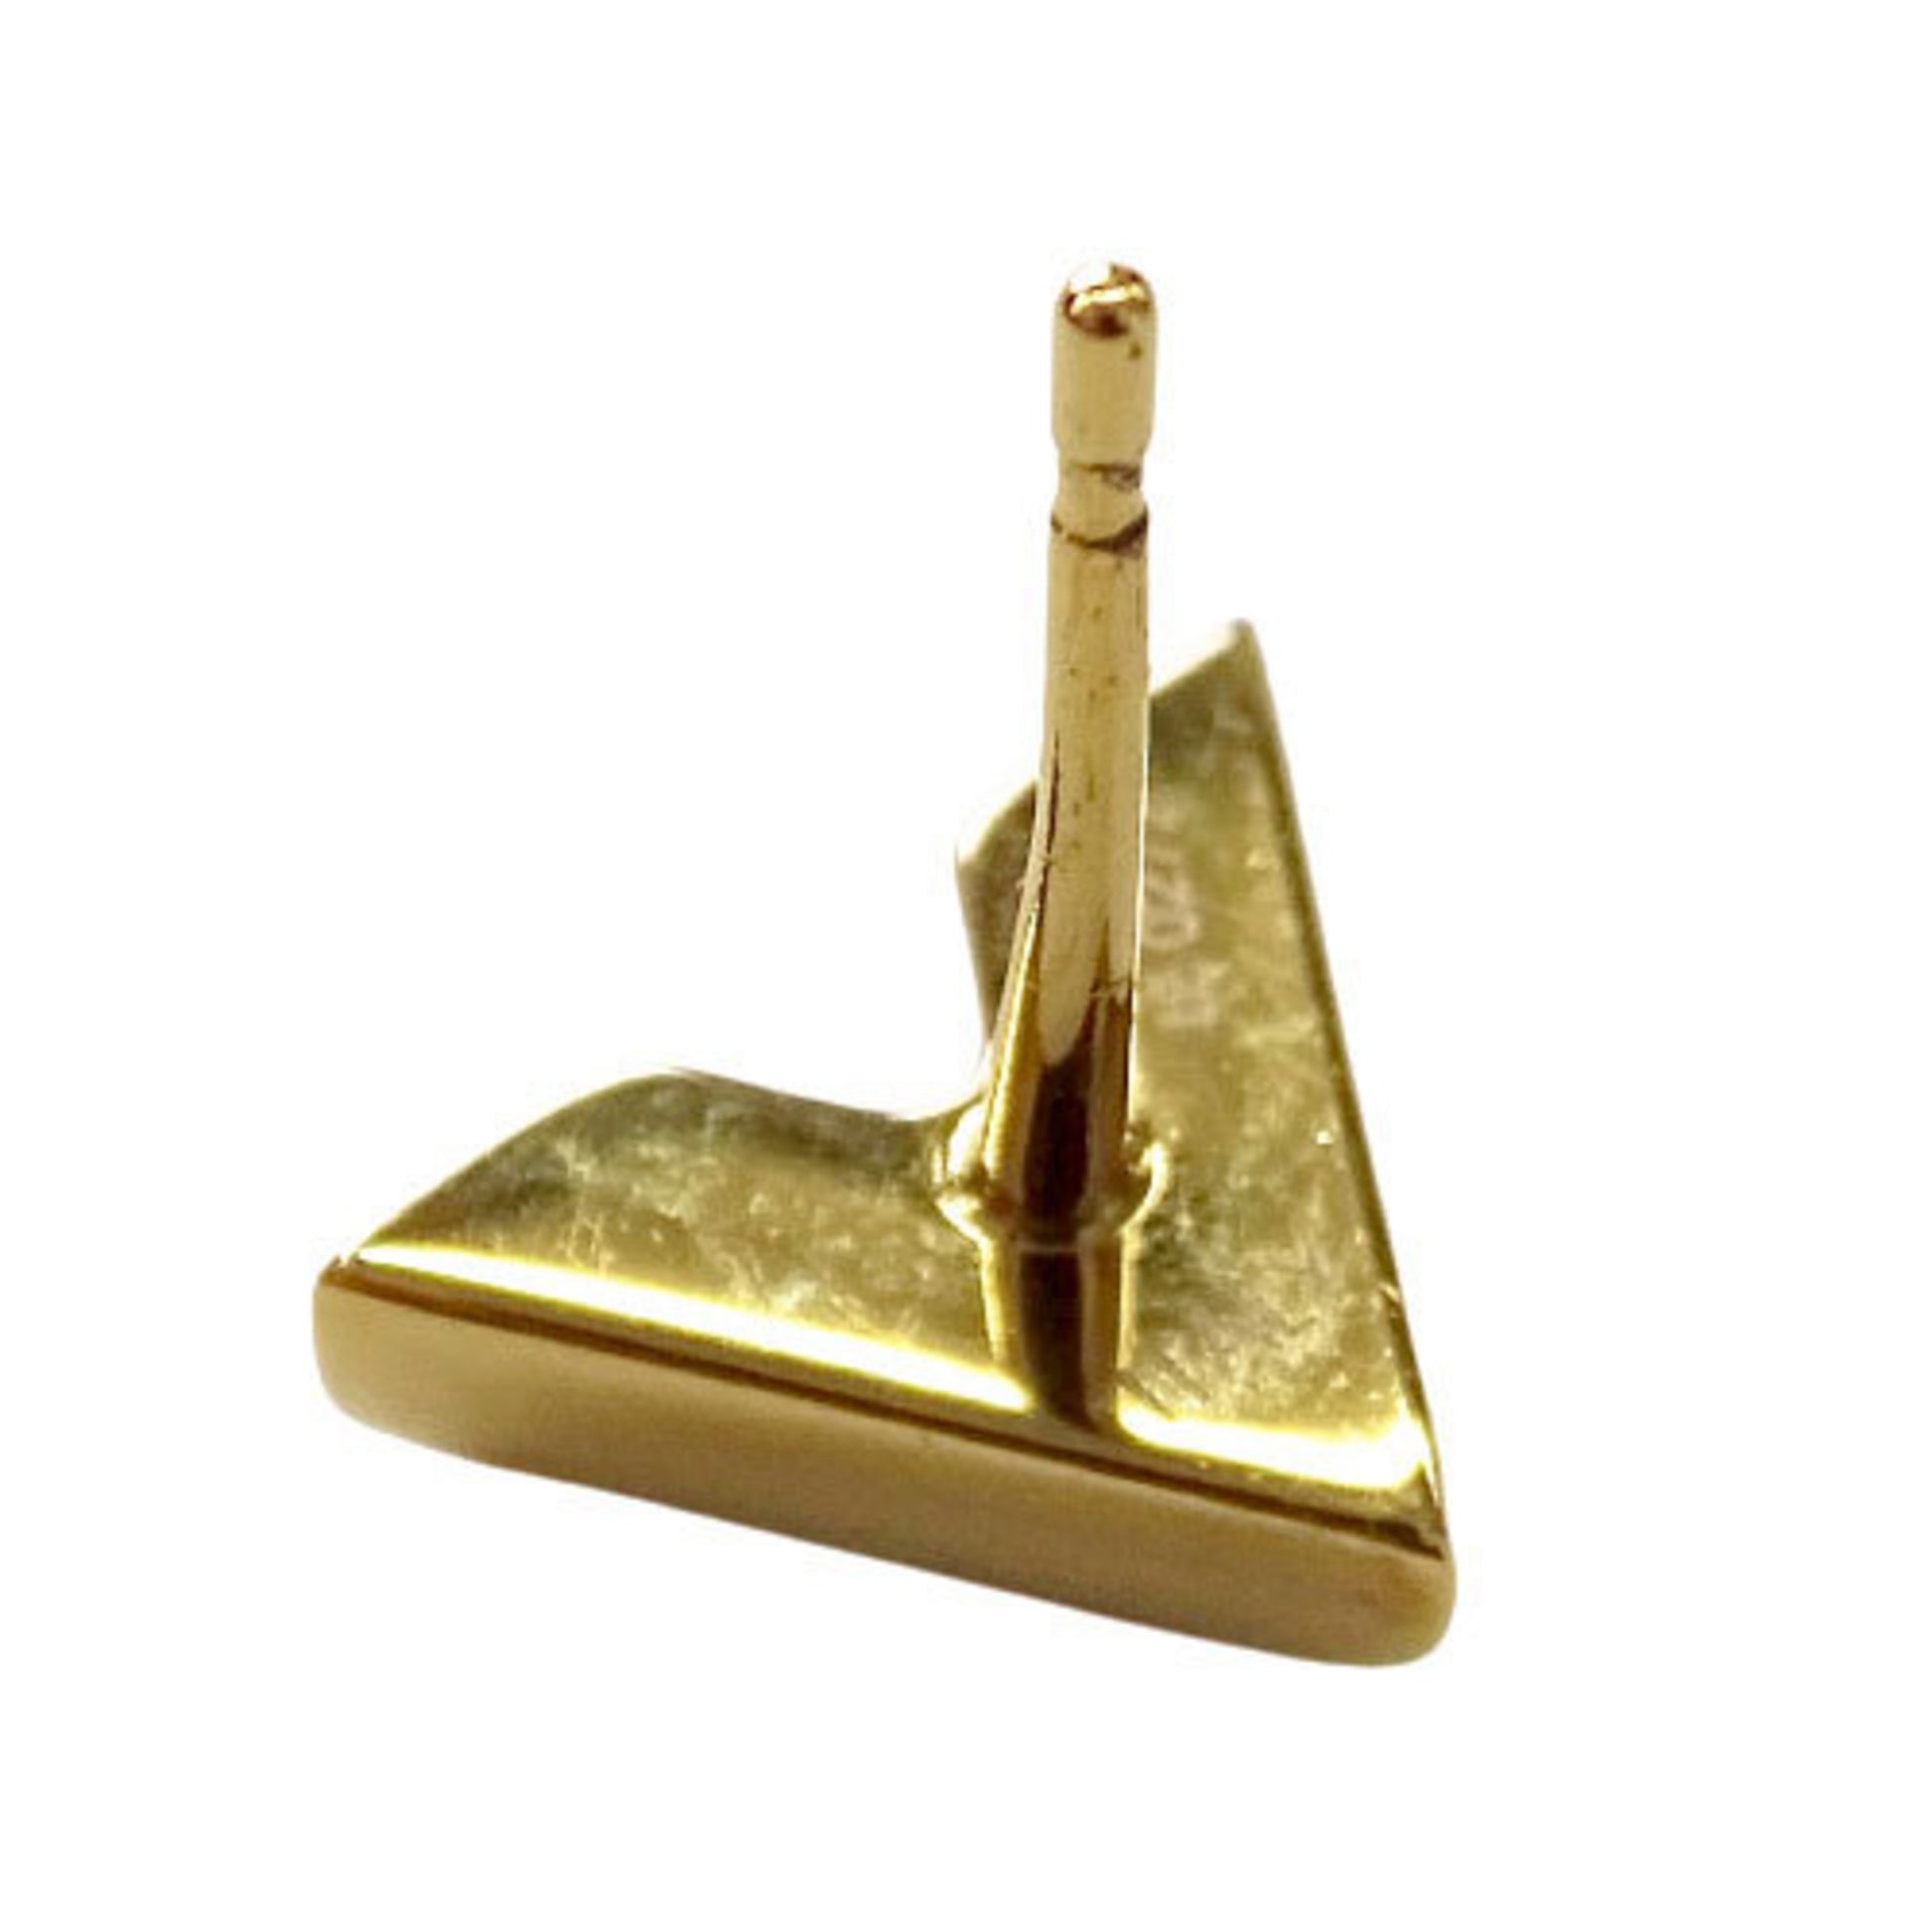 Essential v earrings Louis Vuitton Gold in Other - 34076161